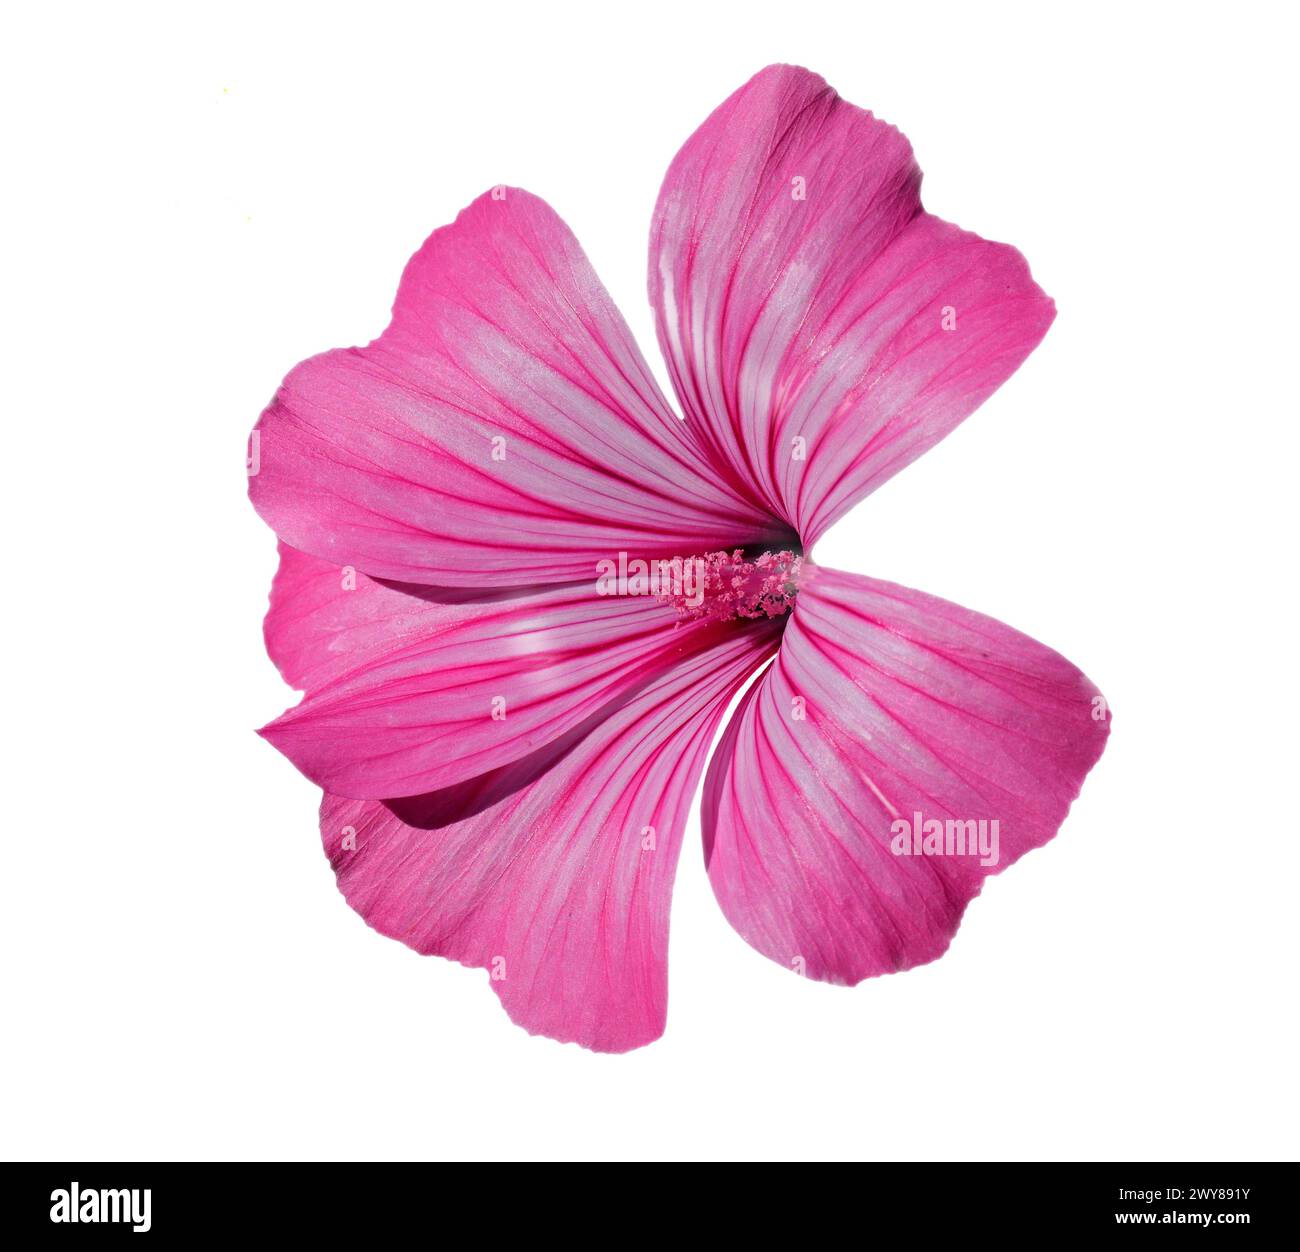 Spring, Portugal. Annual Mallow also known as Rose Mallow or Royal Mallow. Lavatera rosa in full bloom isolated on a white background Malvaceae Family Stock Photo